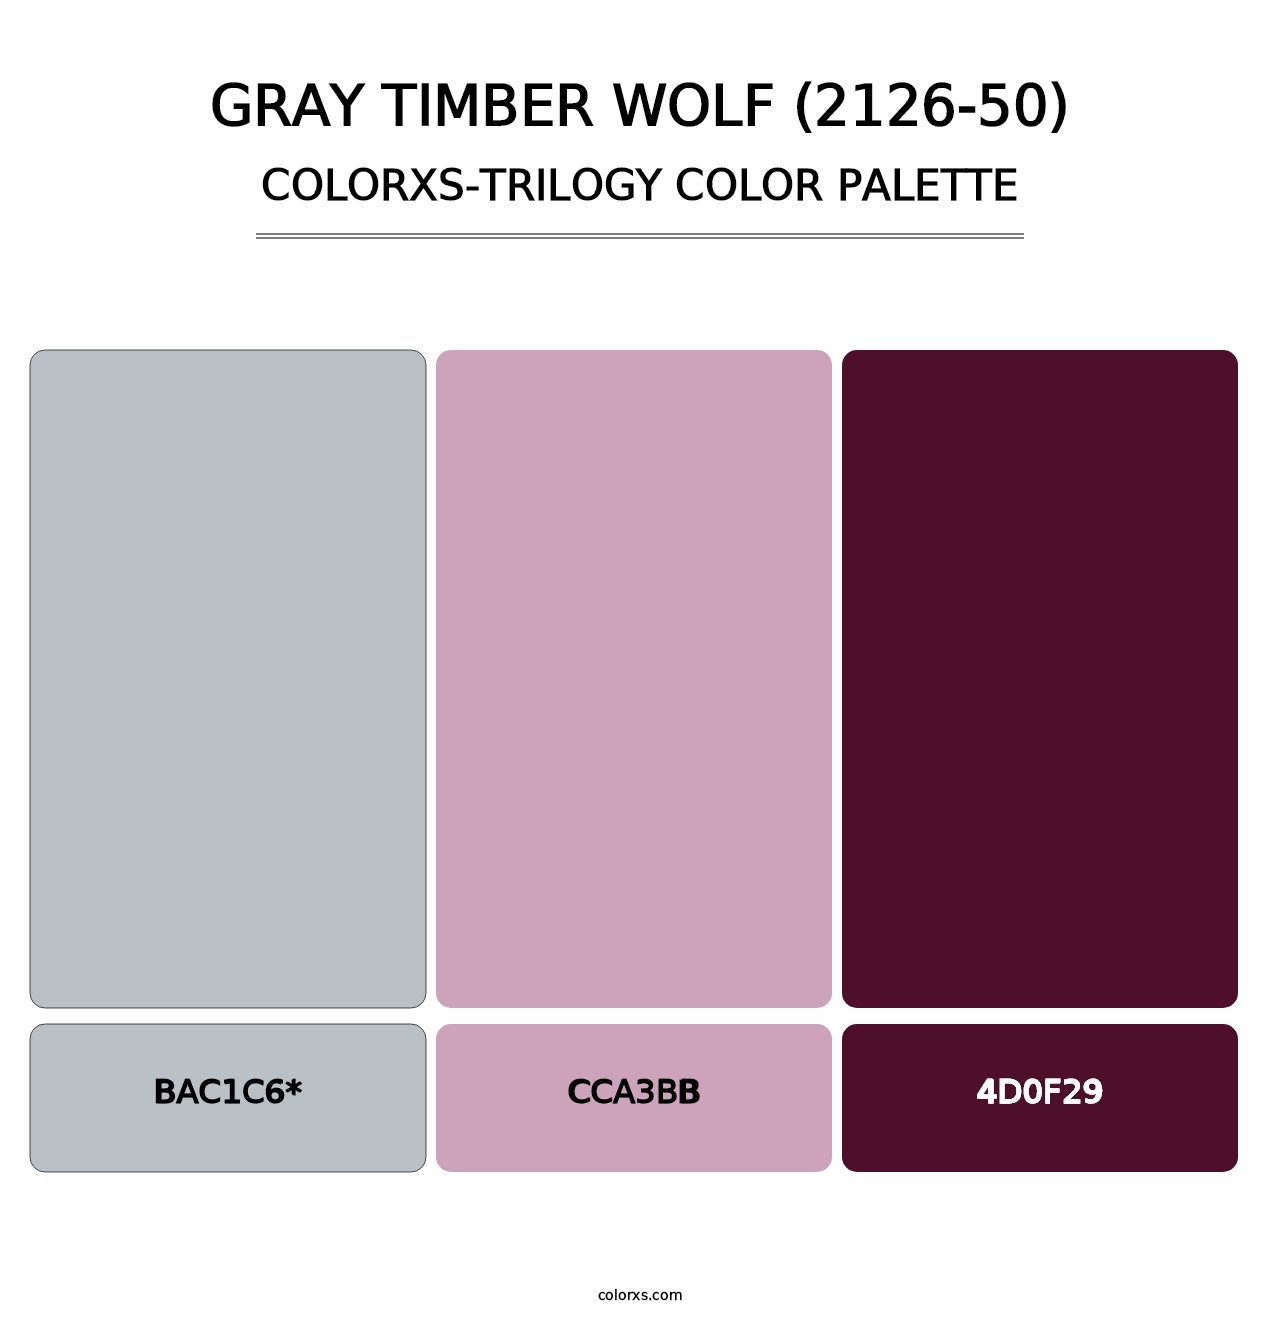 Gray Timber Wolf (2126-50) - Colorxs Trilogy Palette